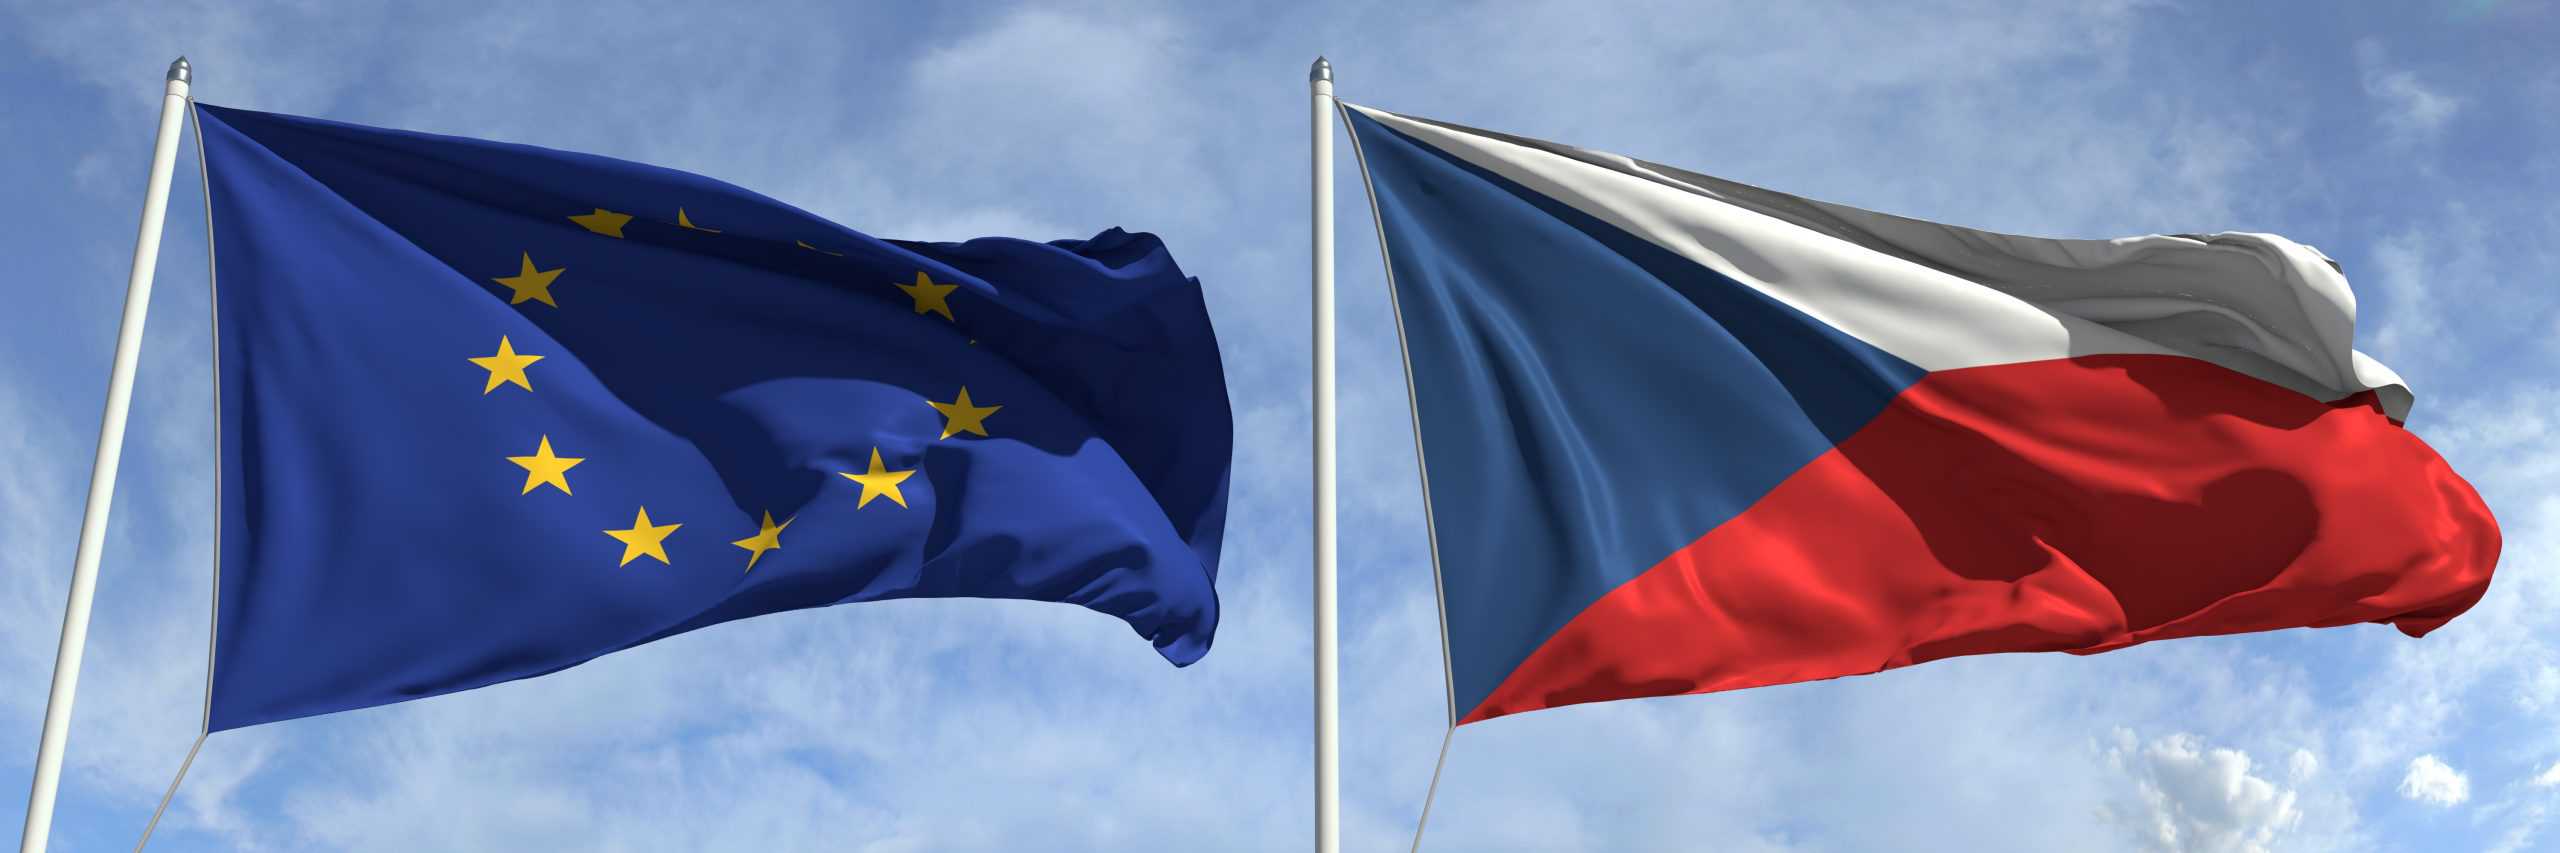 National flags of the European Union and the Czech Republic, 3d rendering